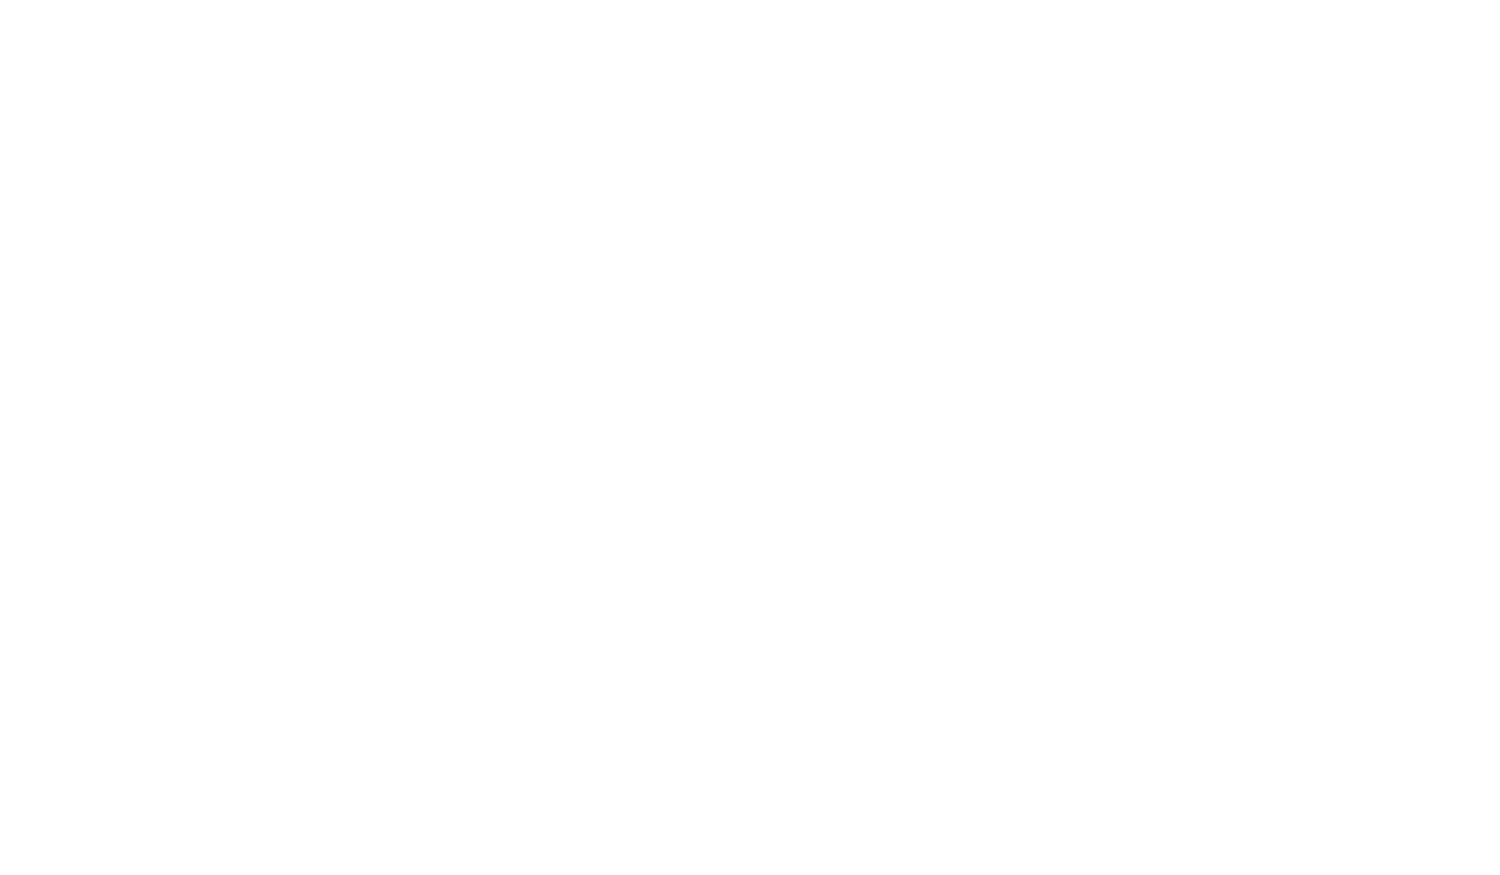 tariq ∙ poetry & other things